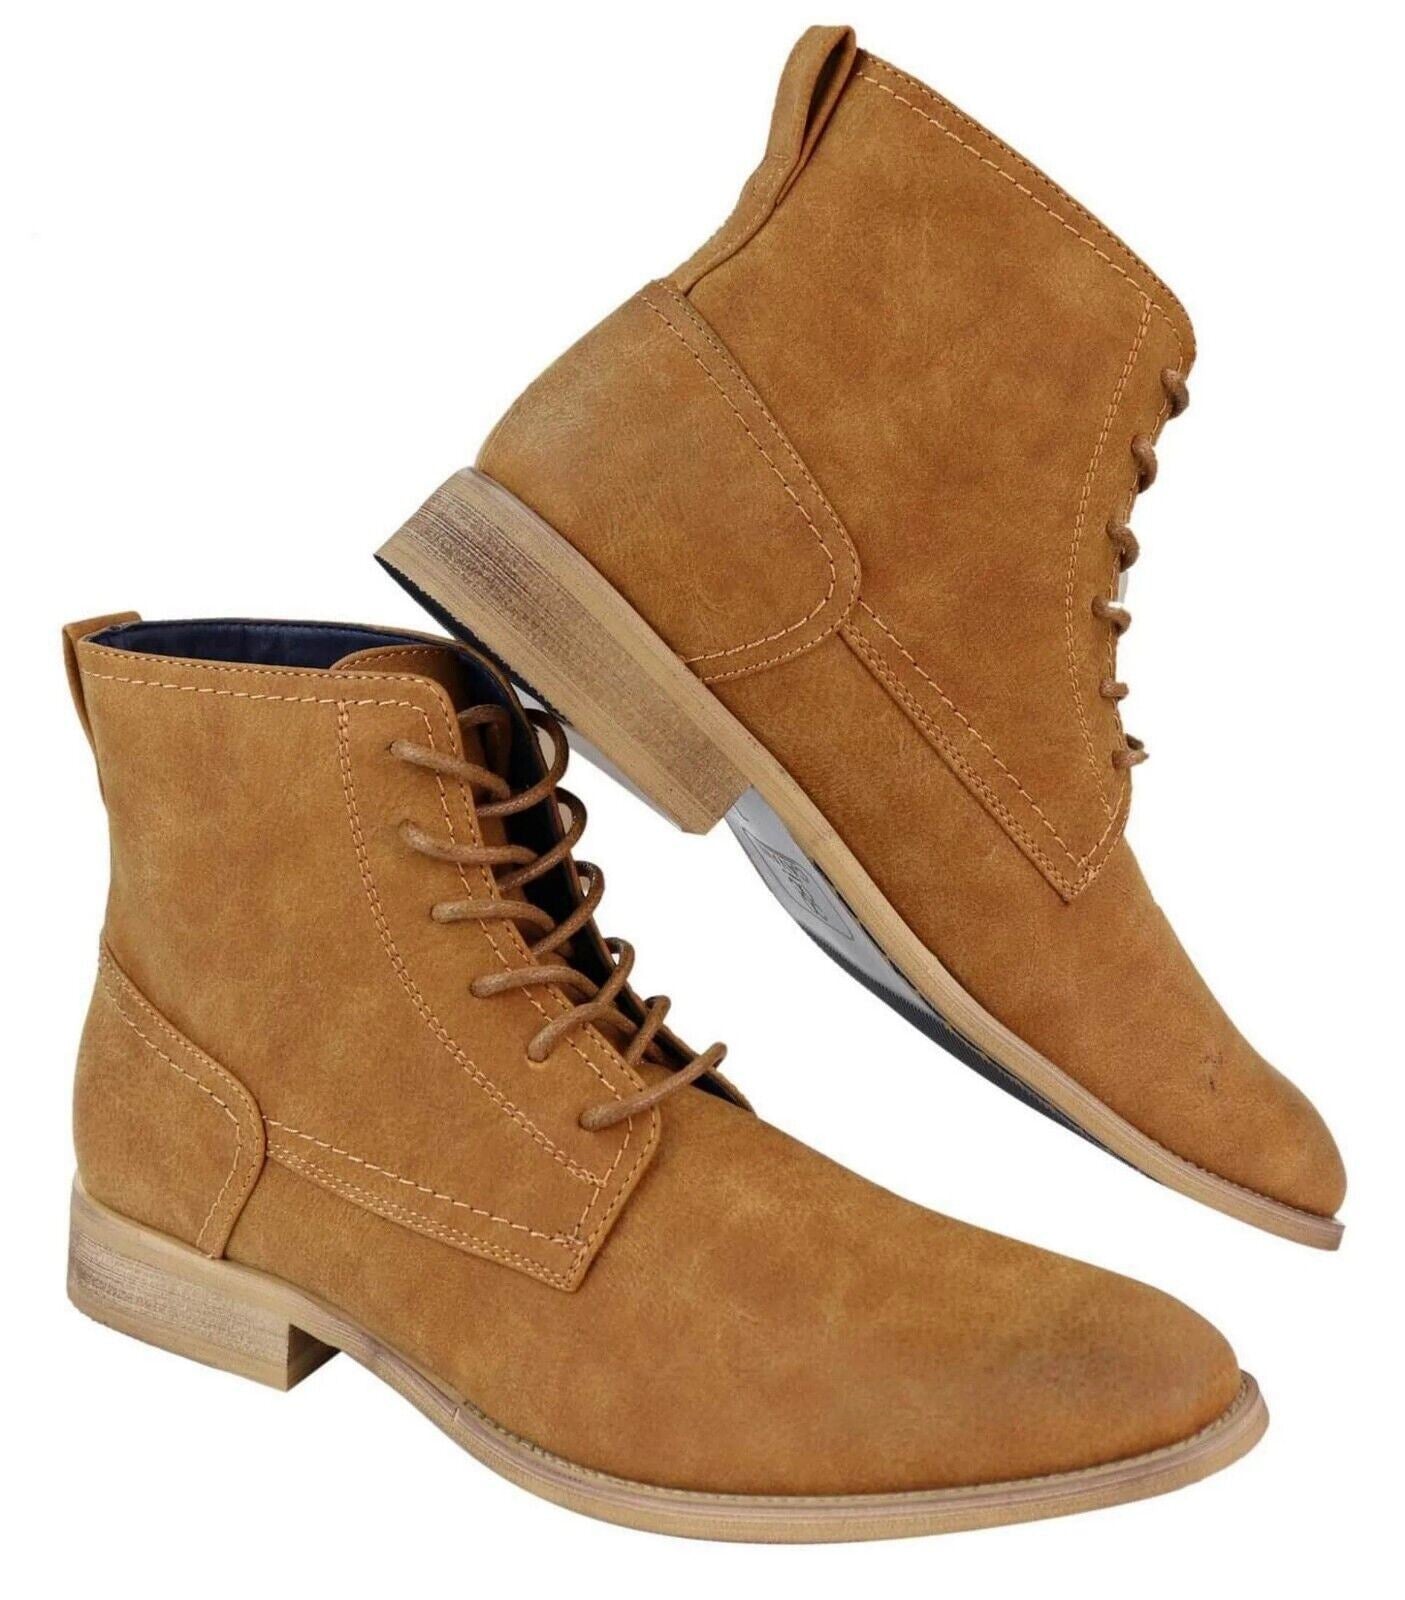 Mens Camel Matt Suede Lace Up Ankle Boots - Upperclass Fashions 